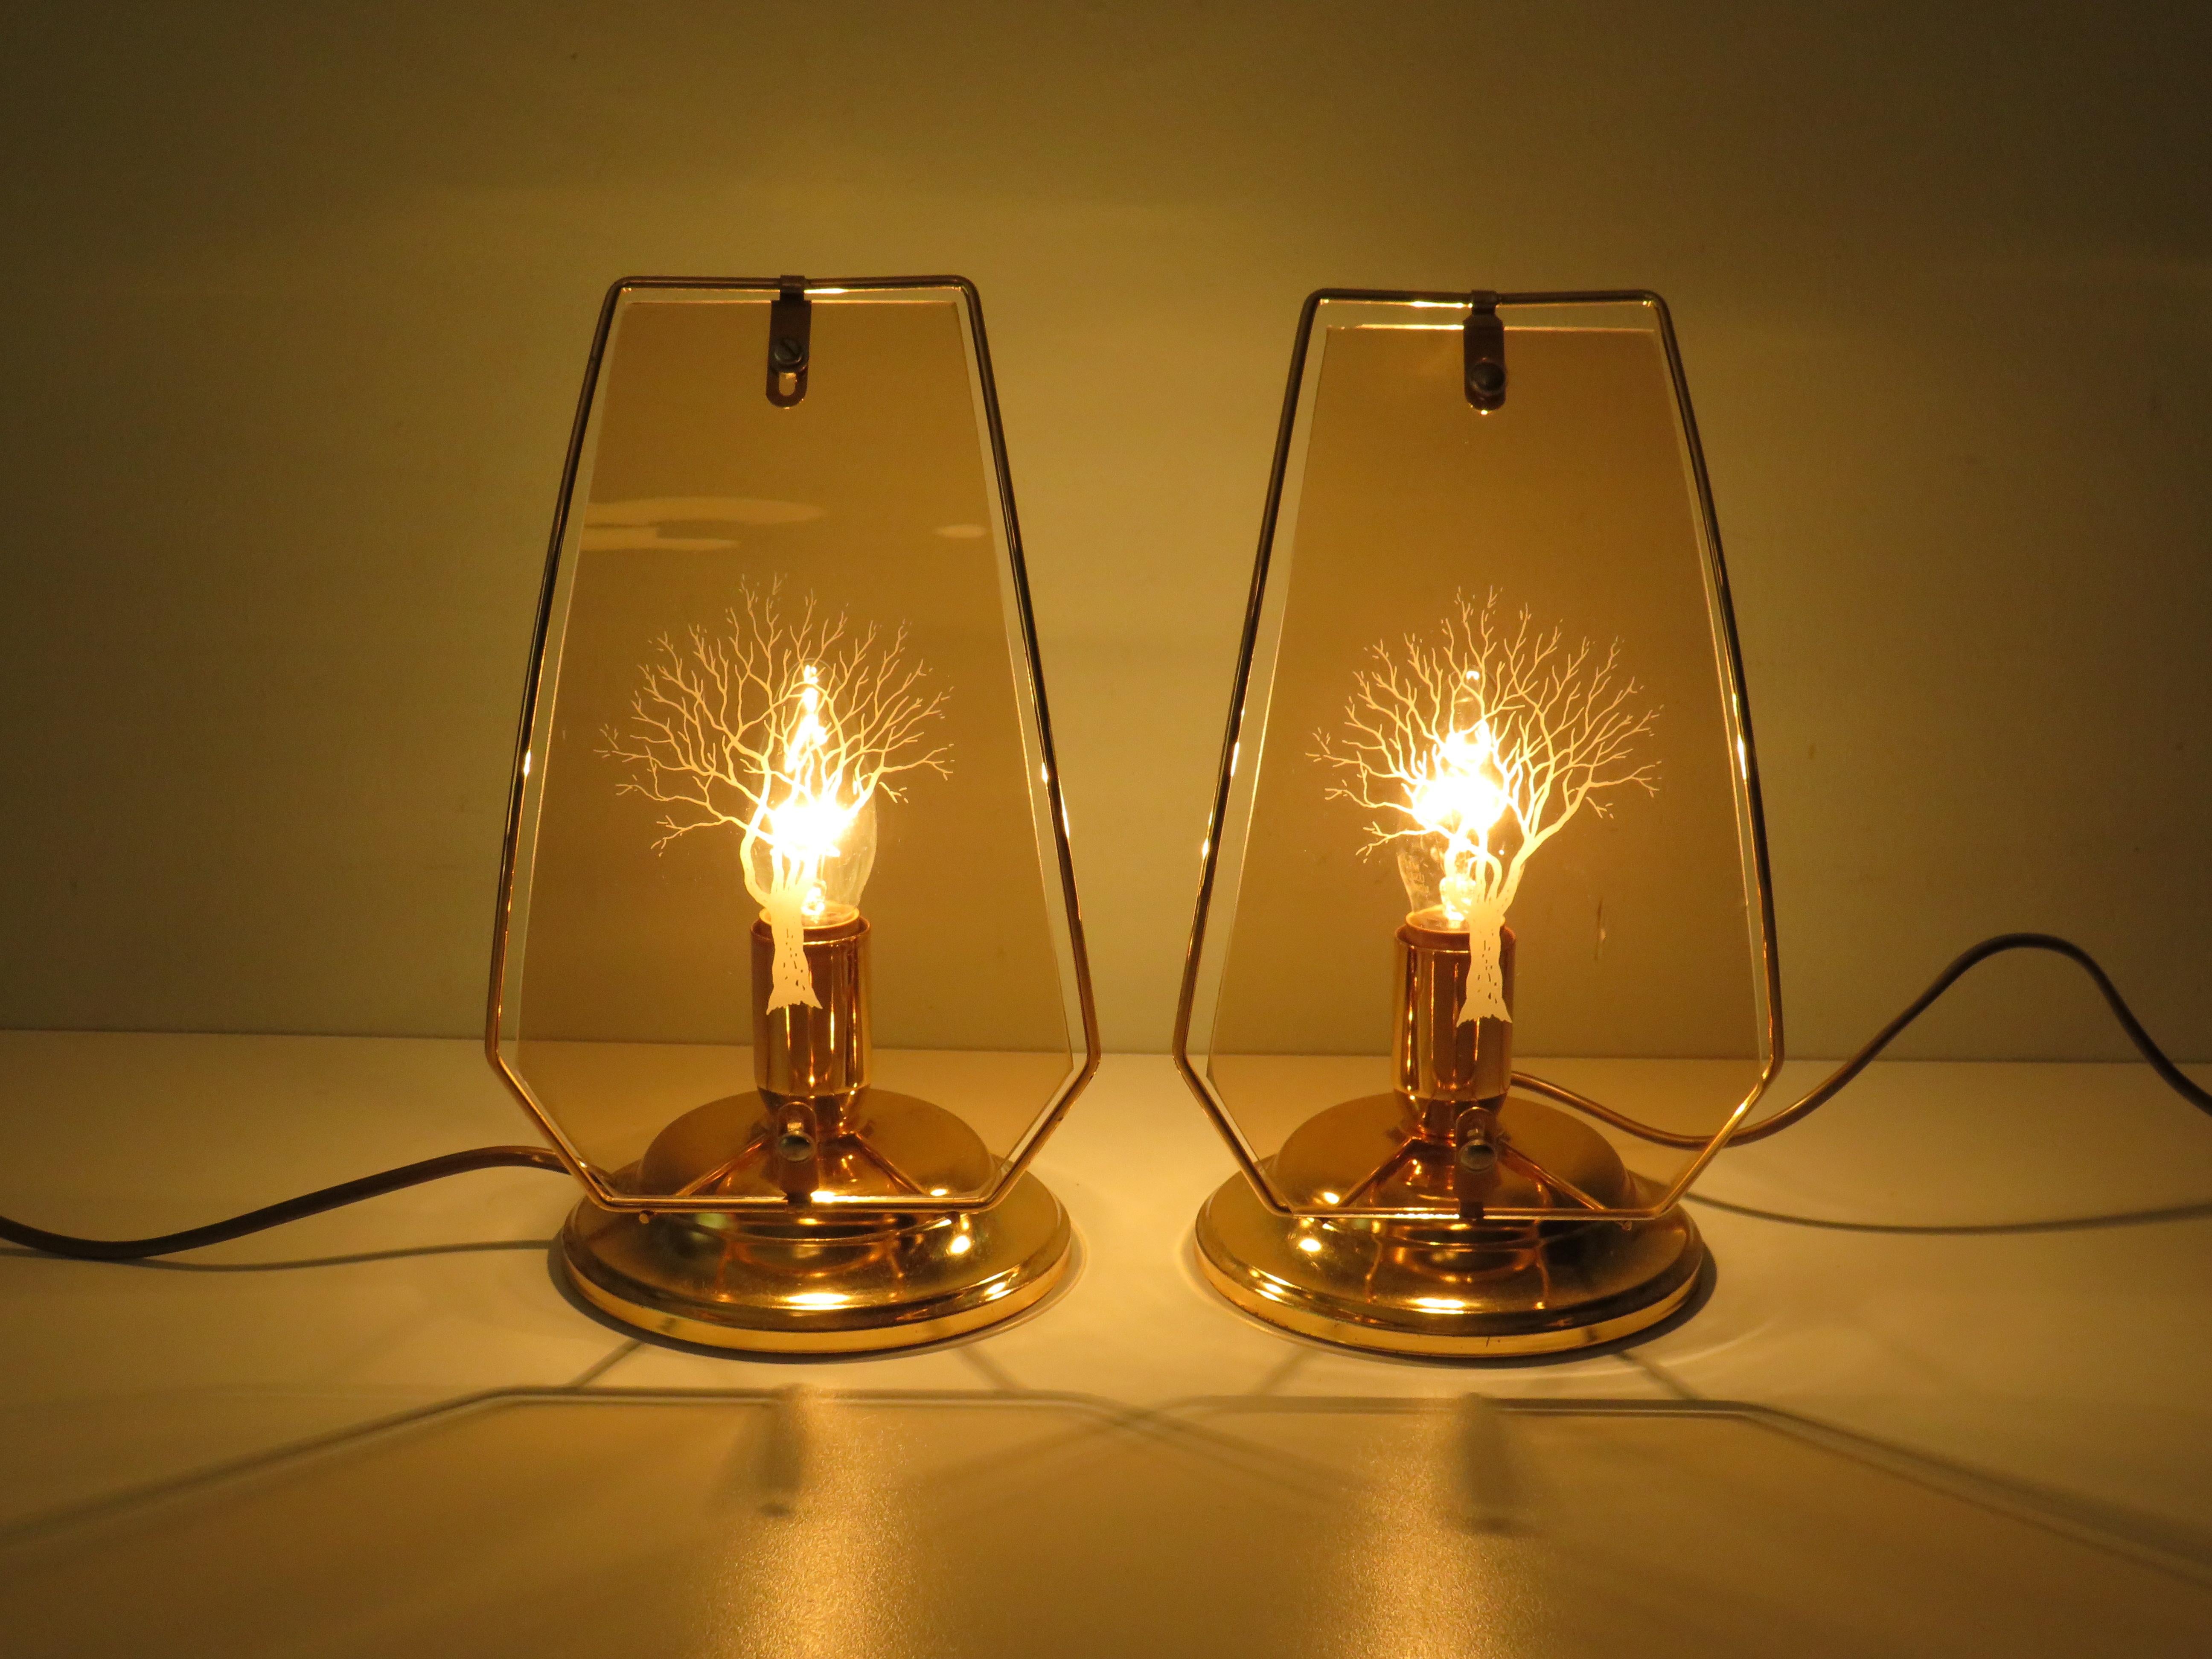 Dutch Set of 2 Bedside Table Lamps, the Netherlands 1970s For Sale